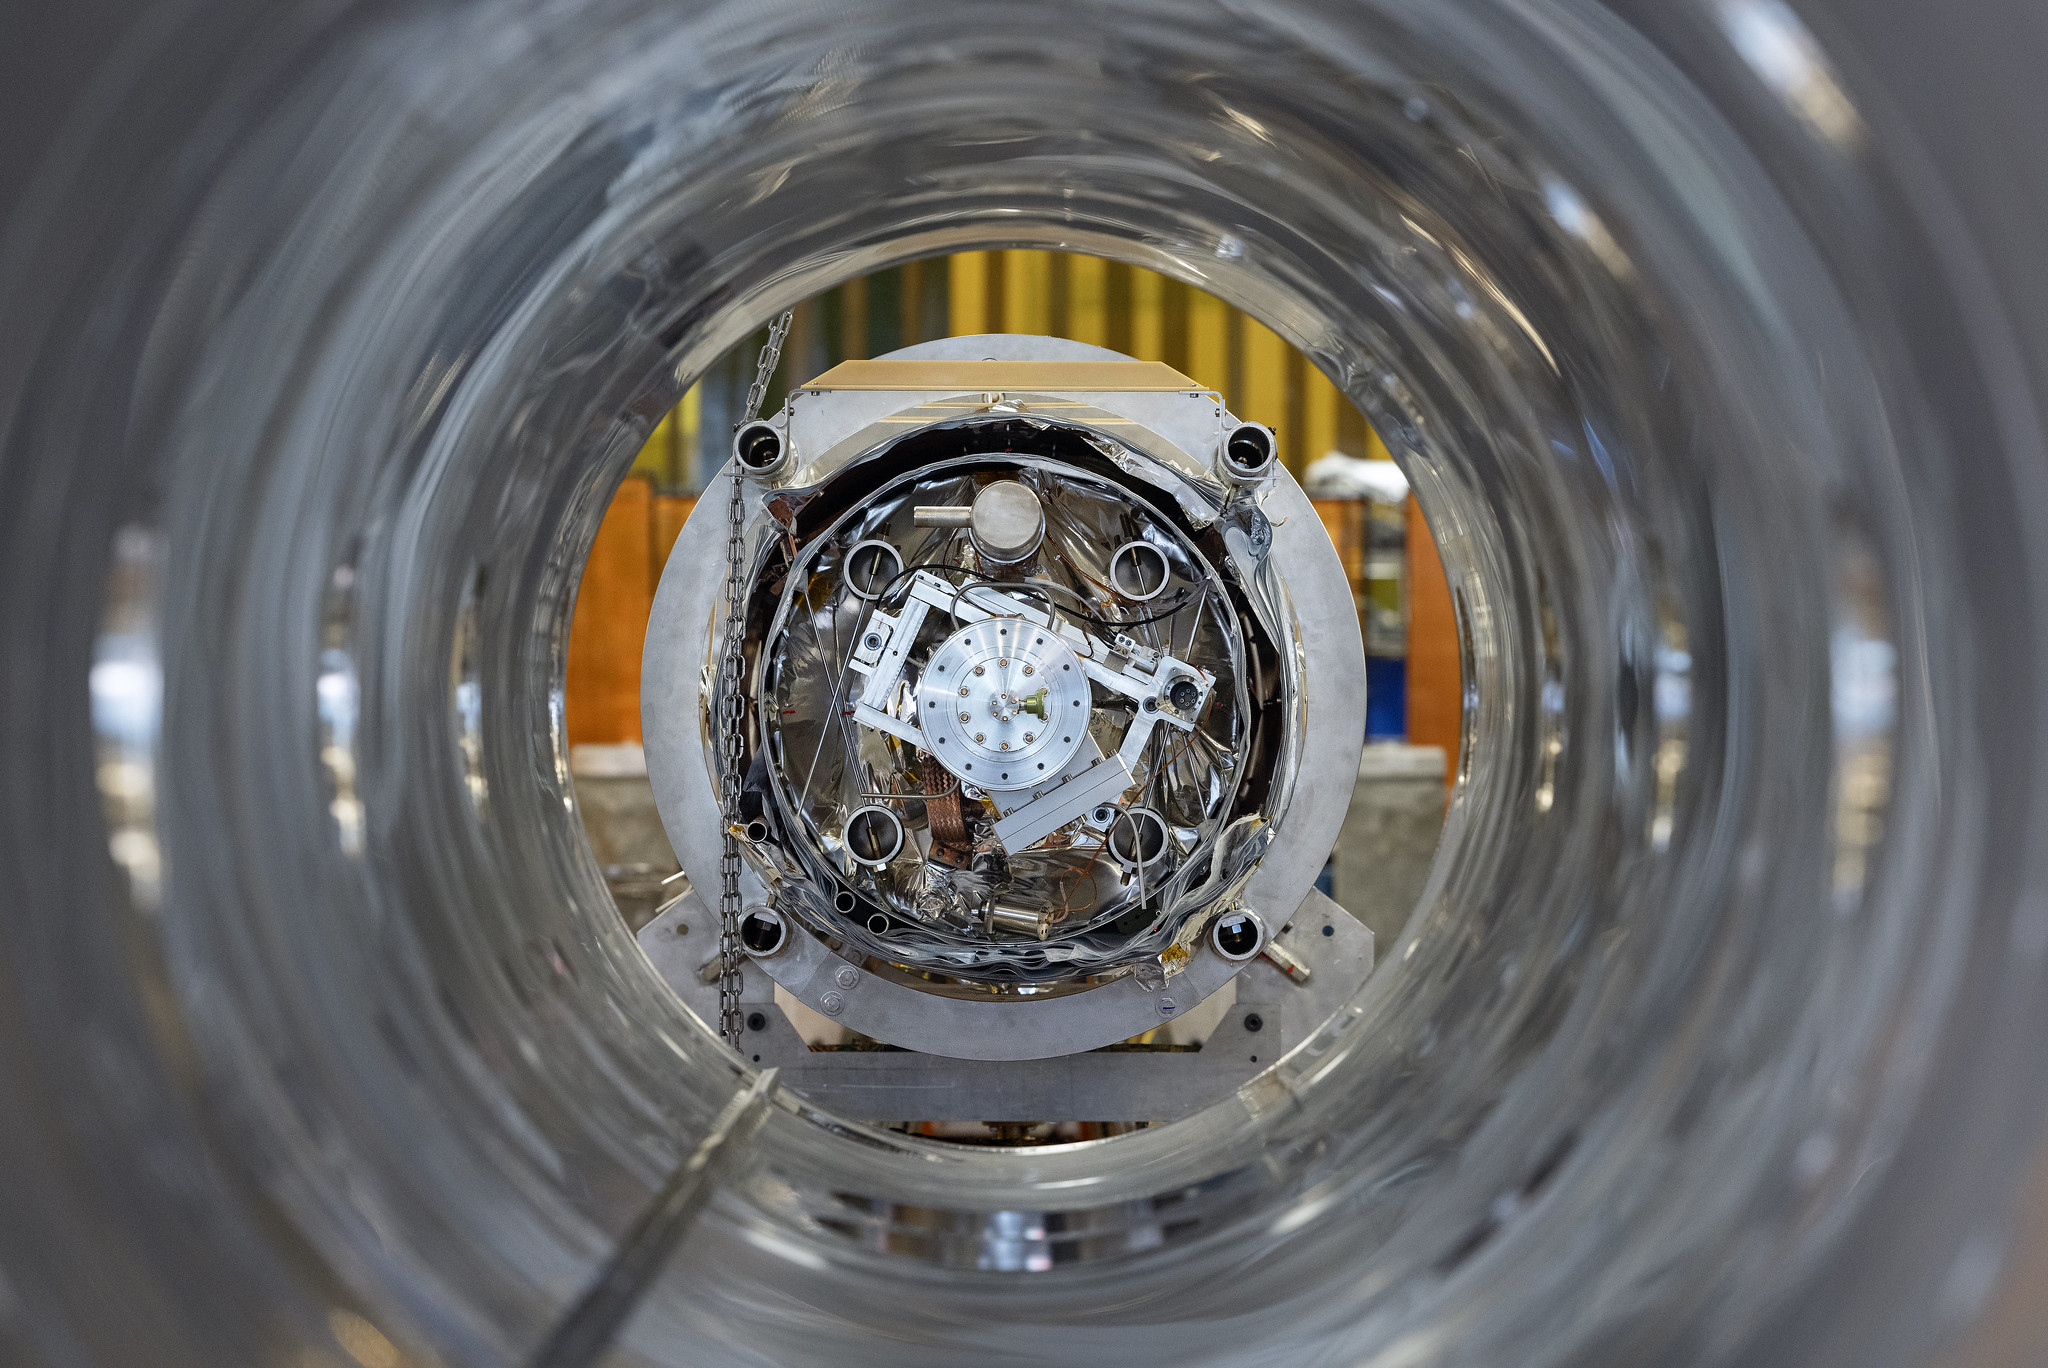 A look down the empty barrel of a cryomodule inside the SRF Institute at Jefferson Lab.